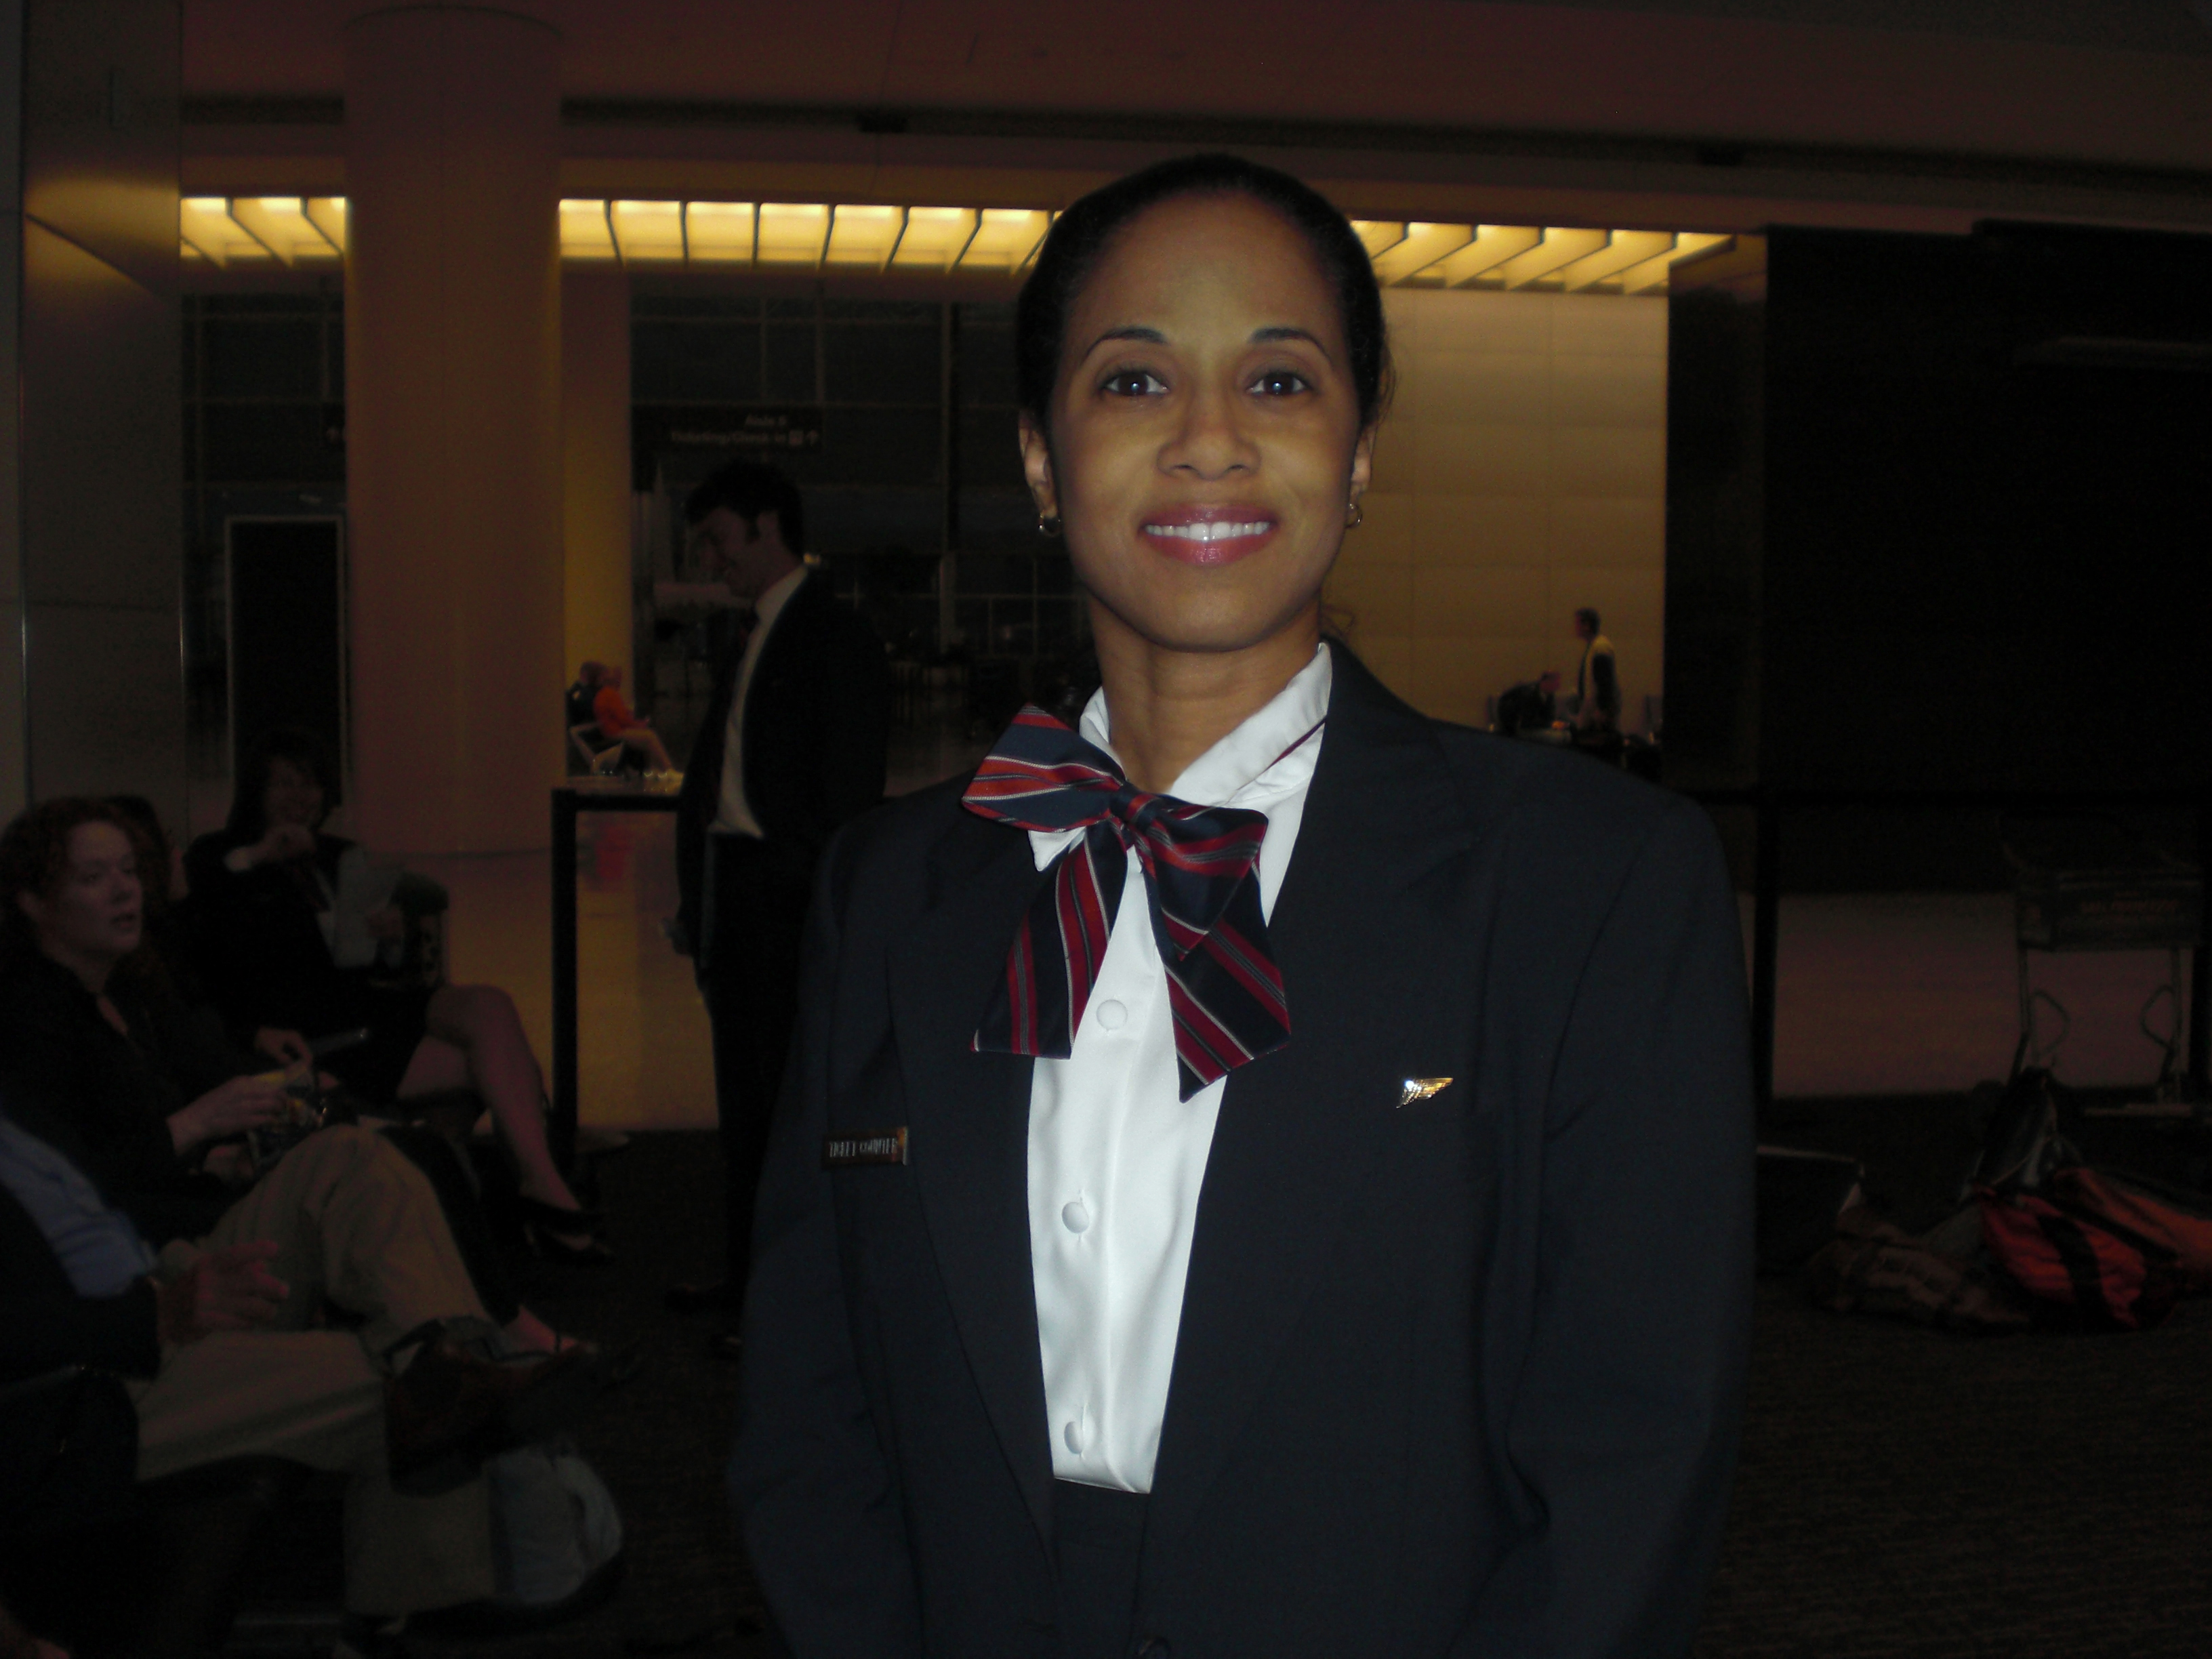 Veronica Loud as an airline ticket agent for the feature film 